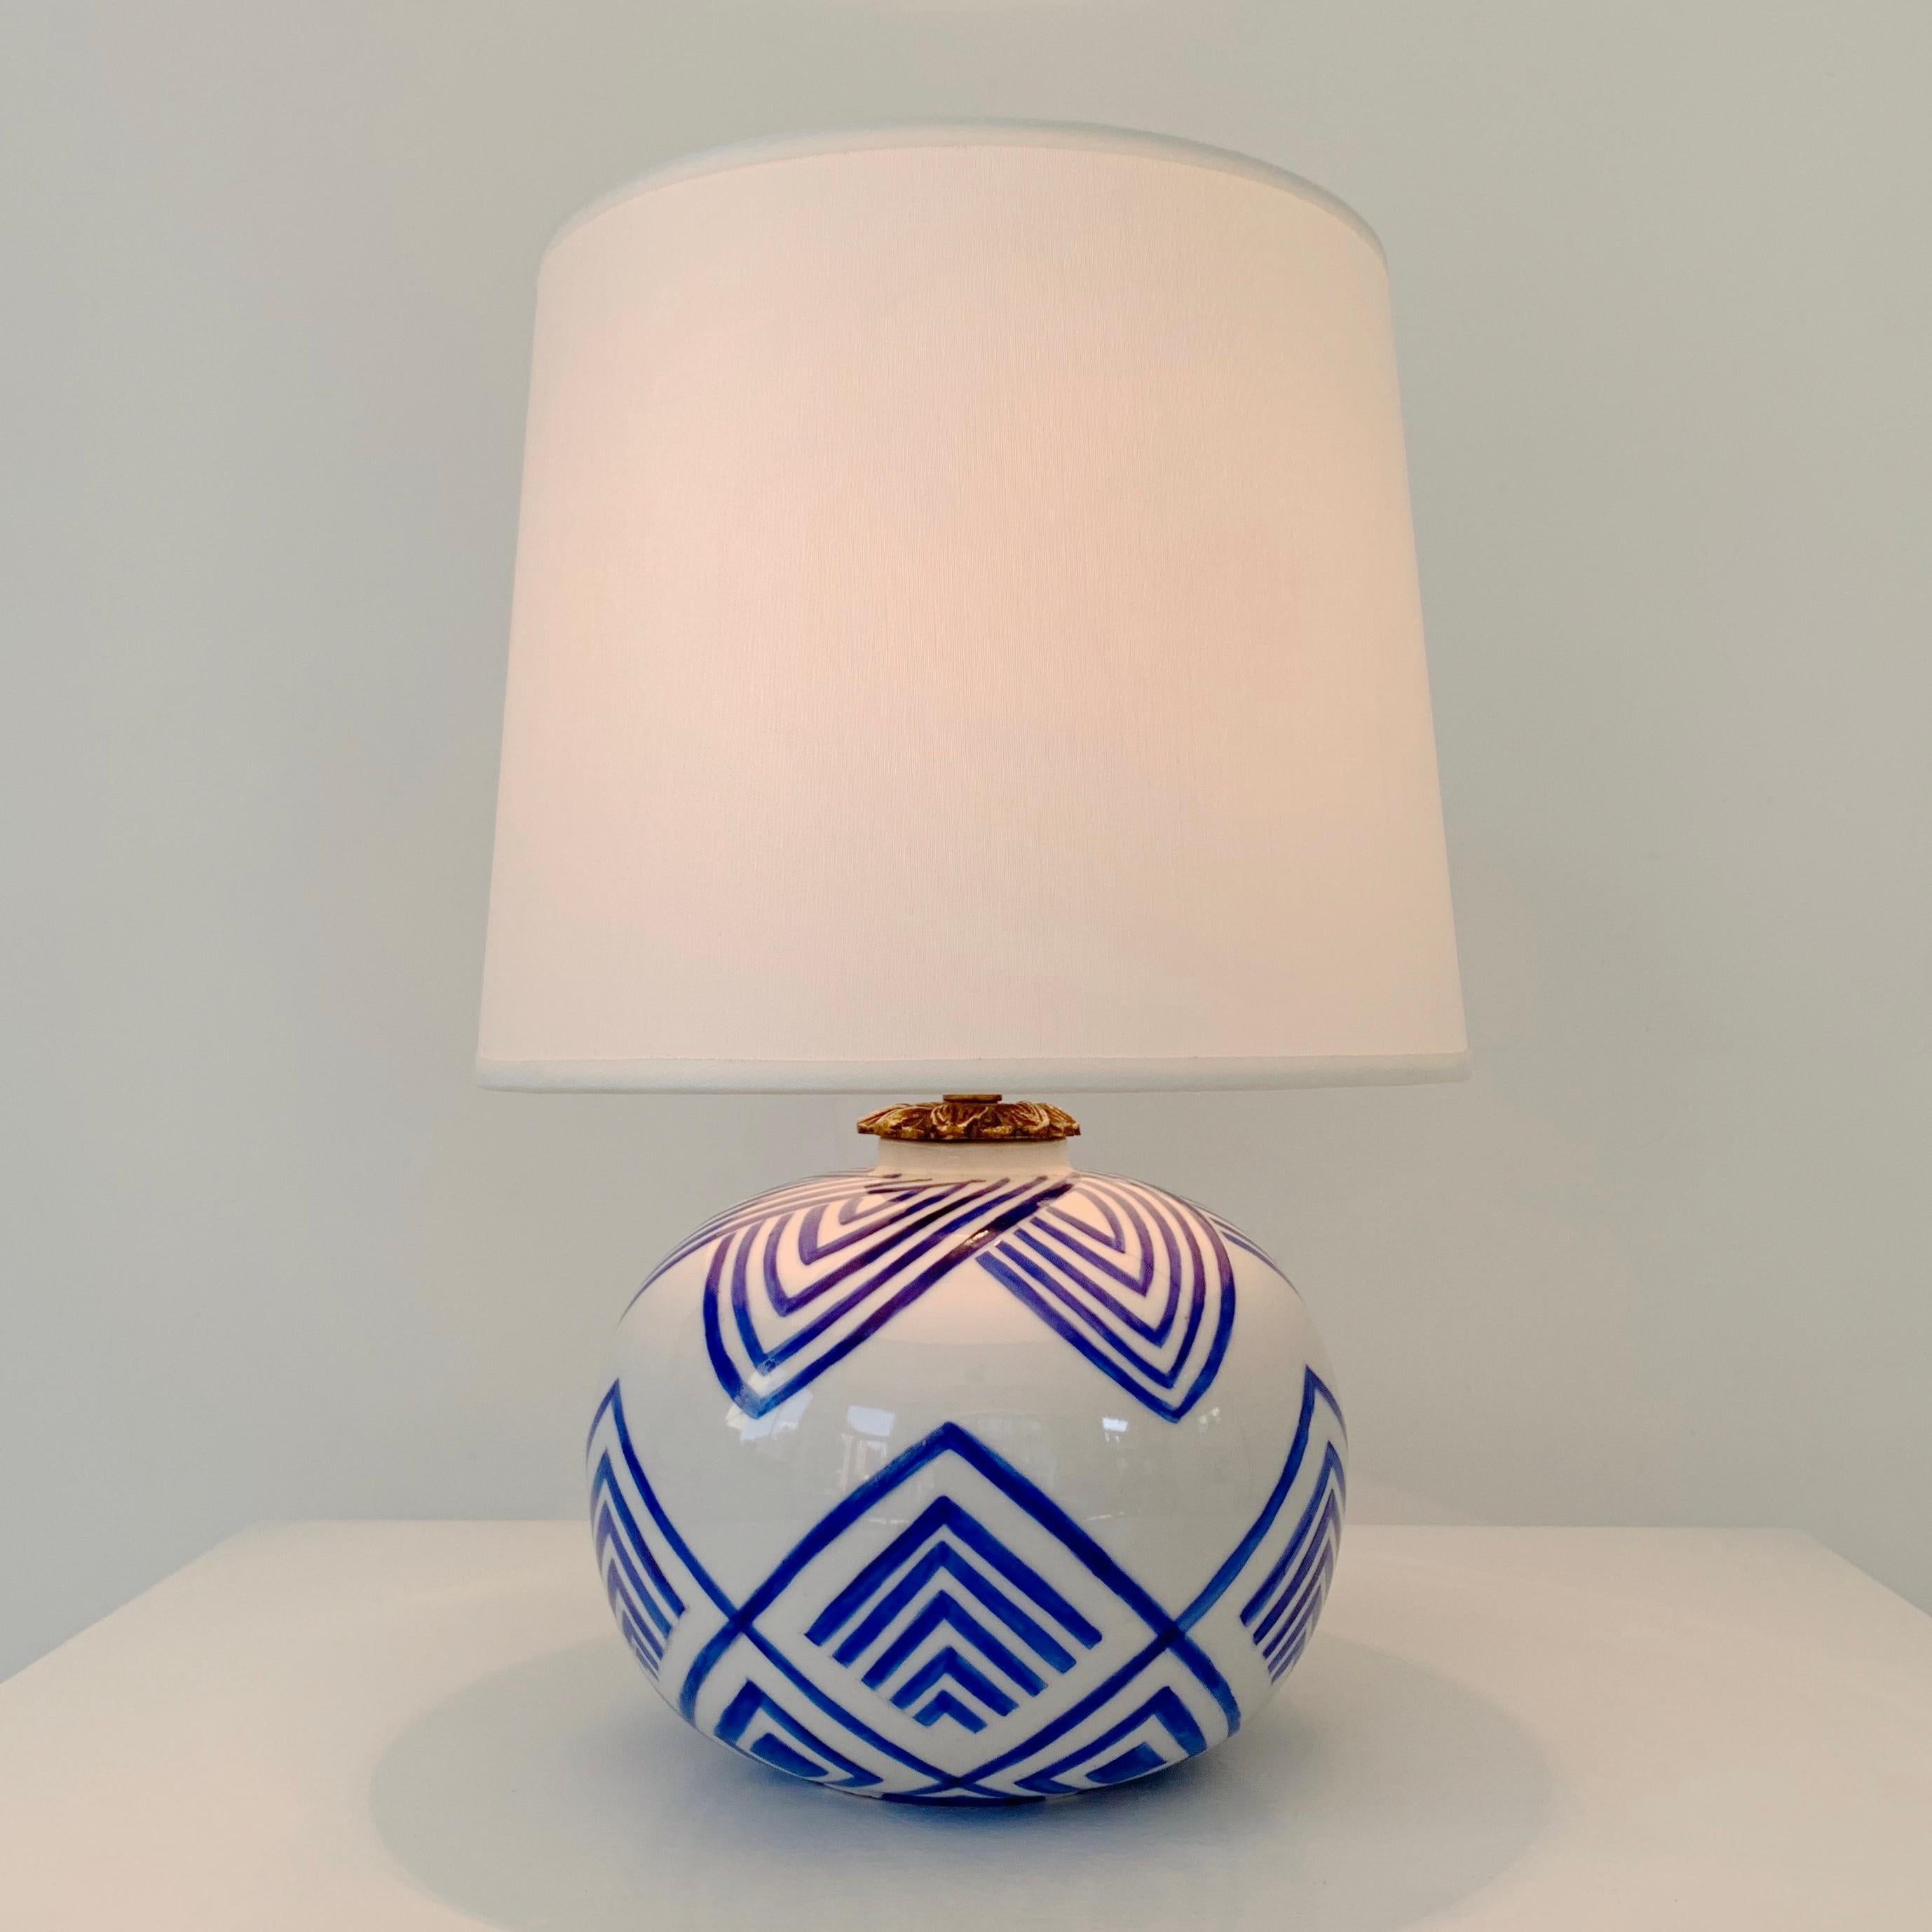 Decorative Art Deco table lamp, 1929, France.
White enameled earthenware with lumiunous blue geometrical hand-made decor.
Rewired. One E 27 bulb.
New white fabric.
Signed underneath H.Gerard 1929.
Good condition.
H.T. 30cm,  ceramic only H.